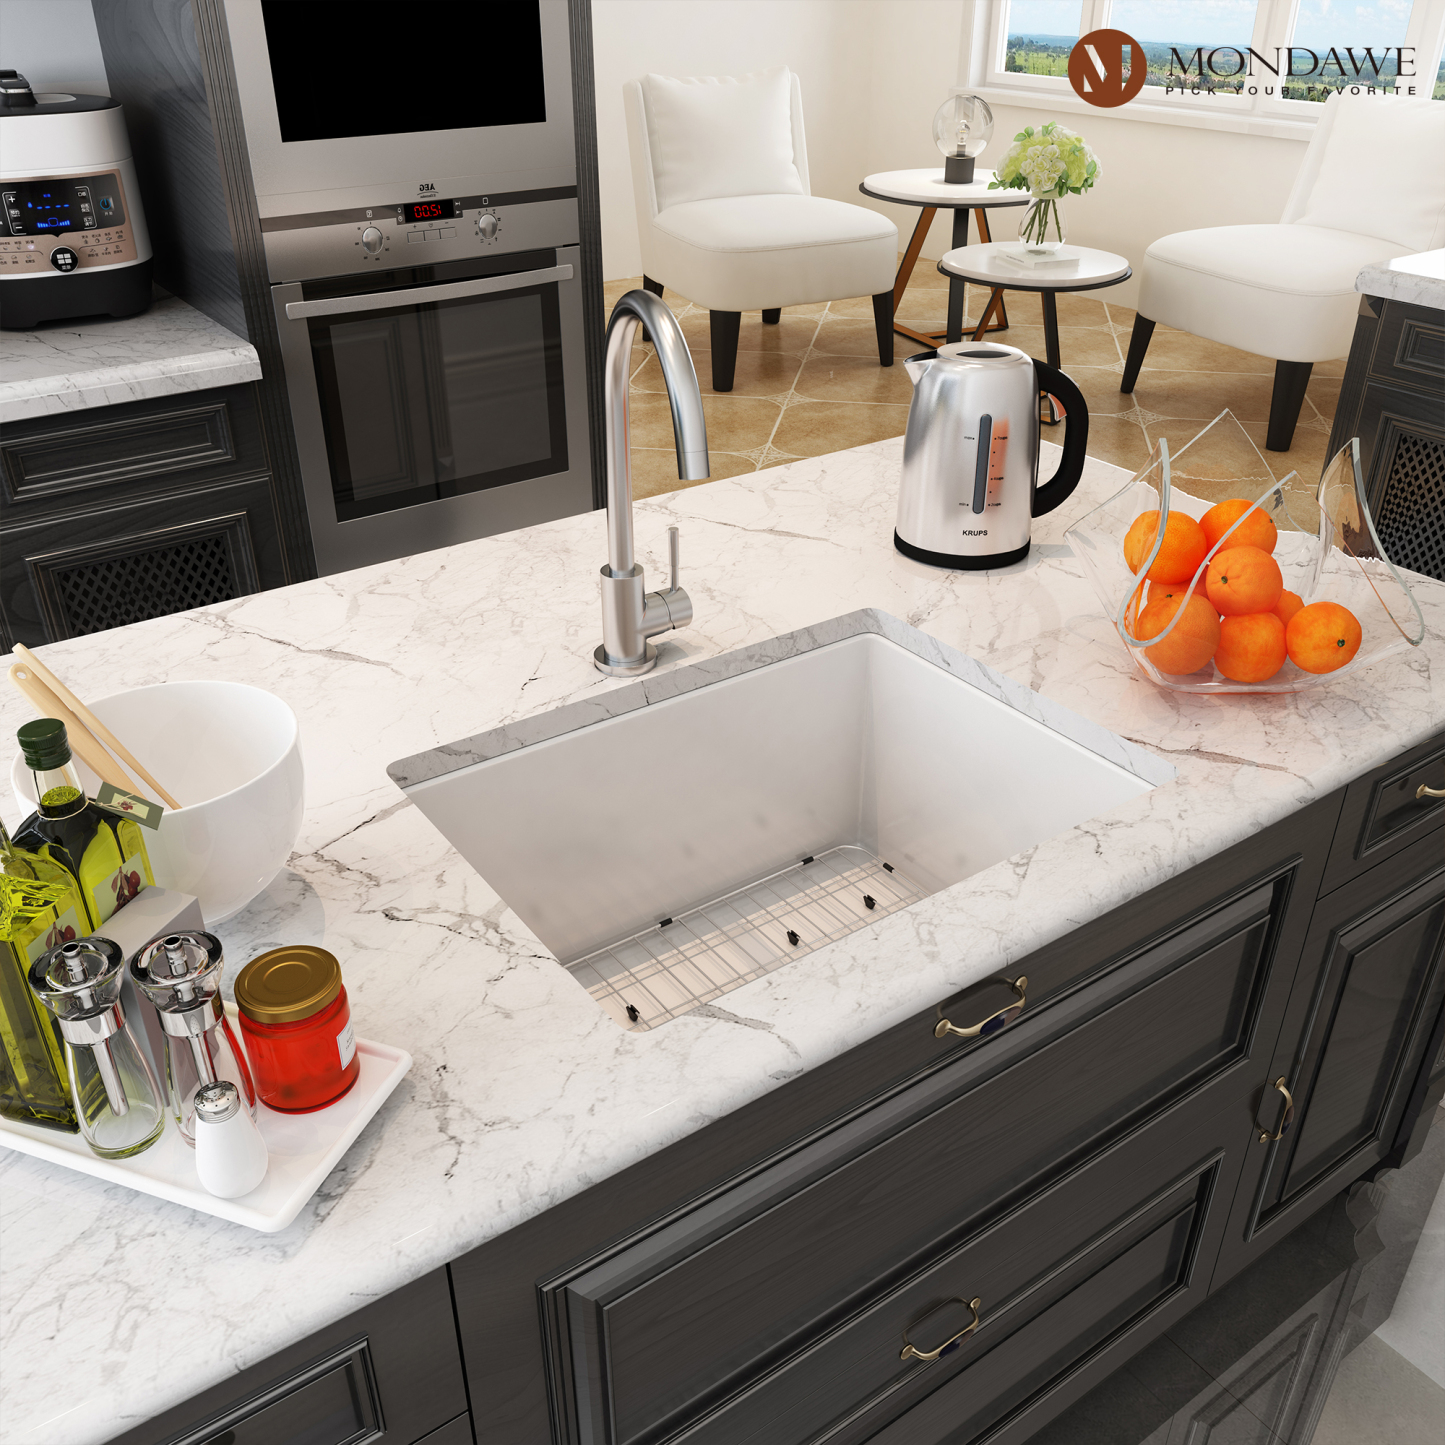 Undermount 24 in. single bowl fireclay kitchen sink in white comes with high-arc kitchen faucet-Mondawe